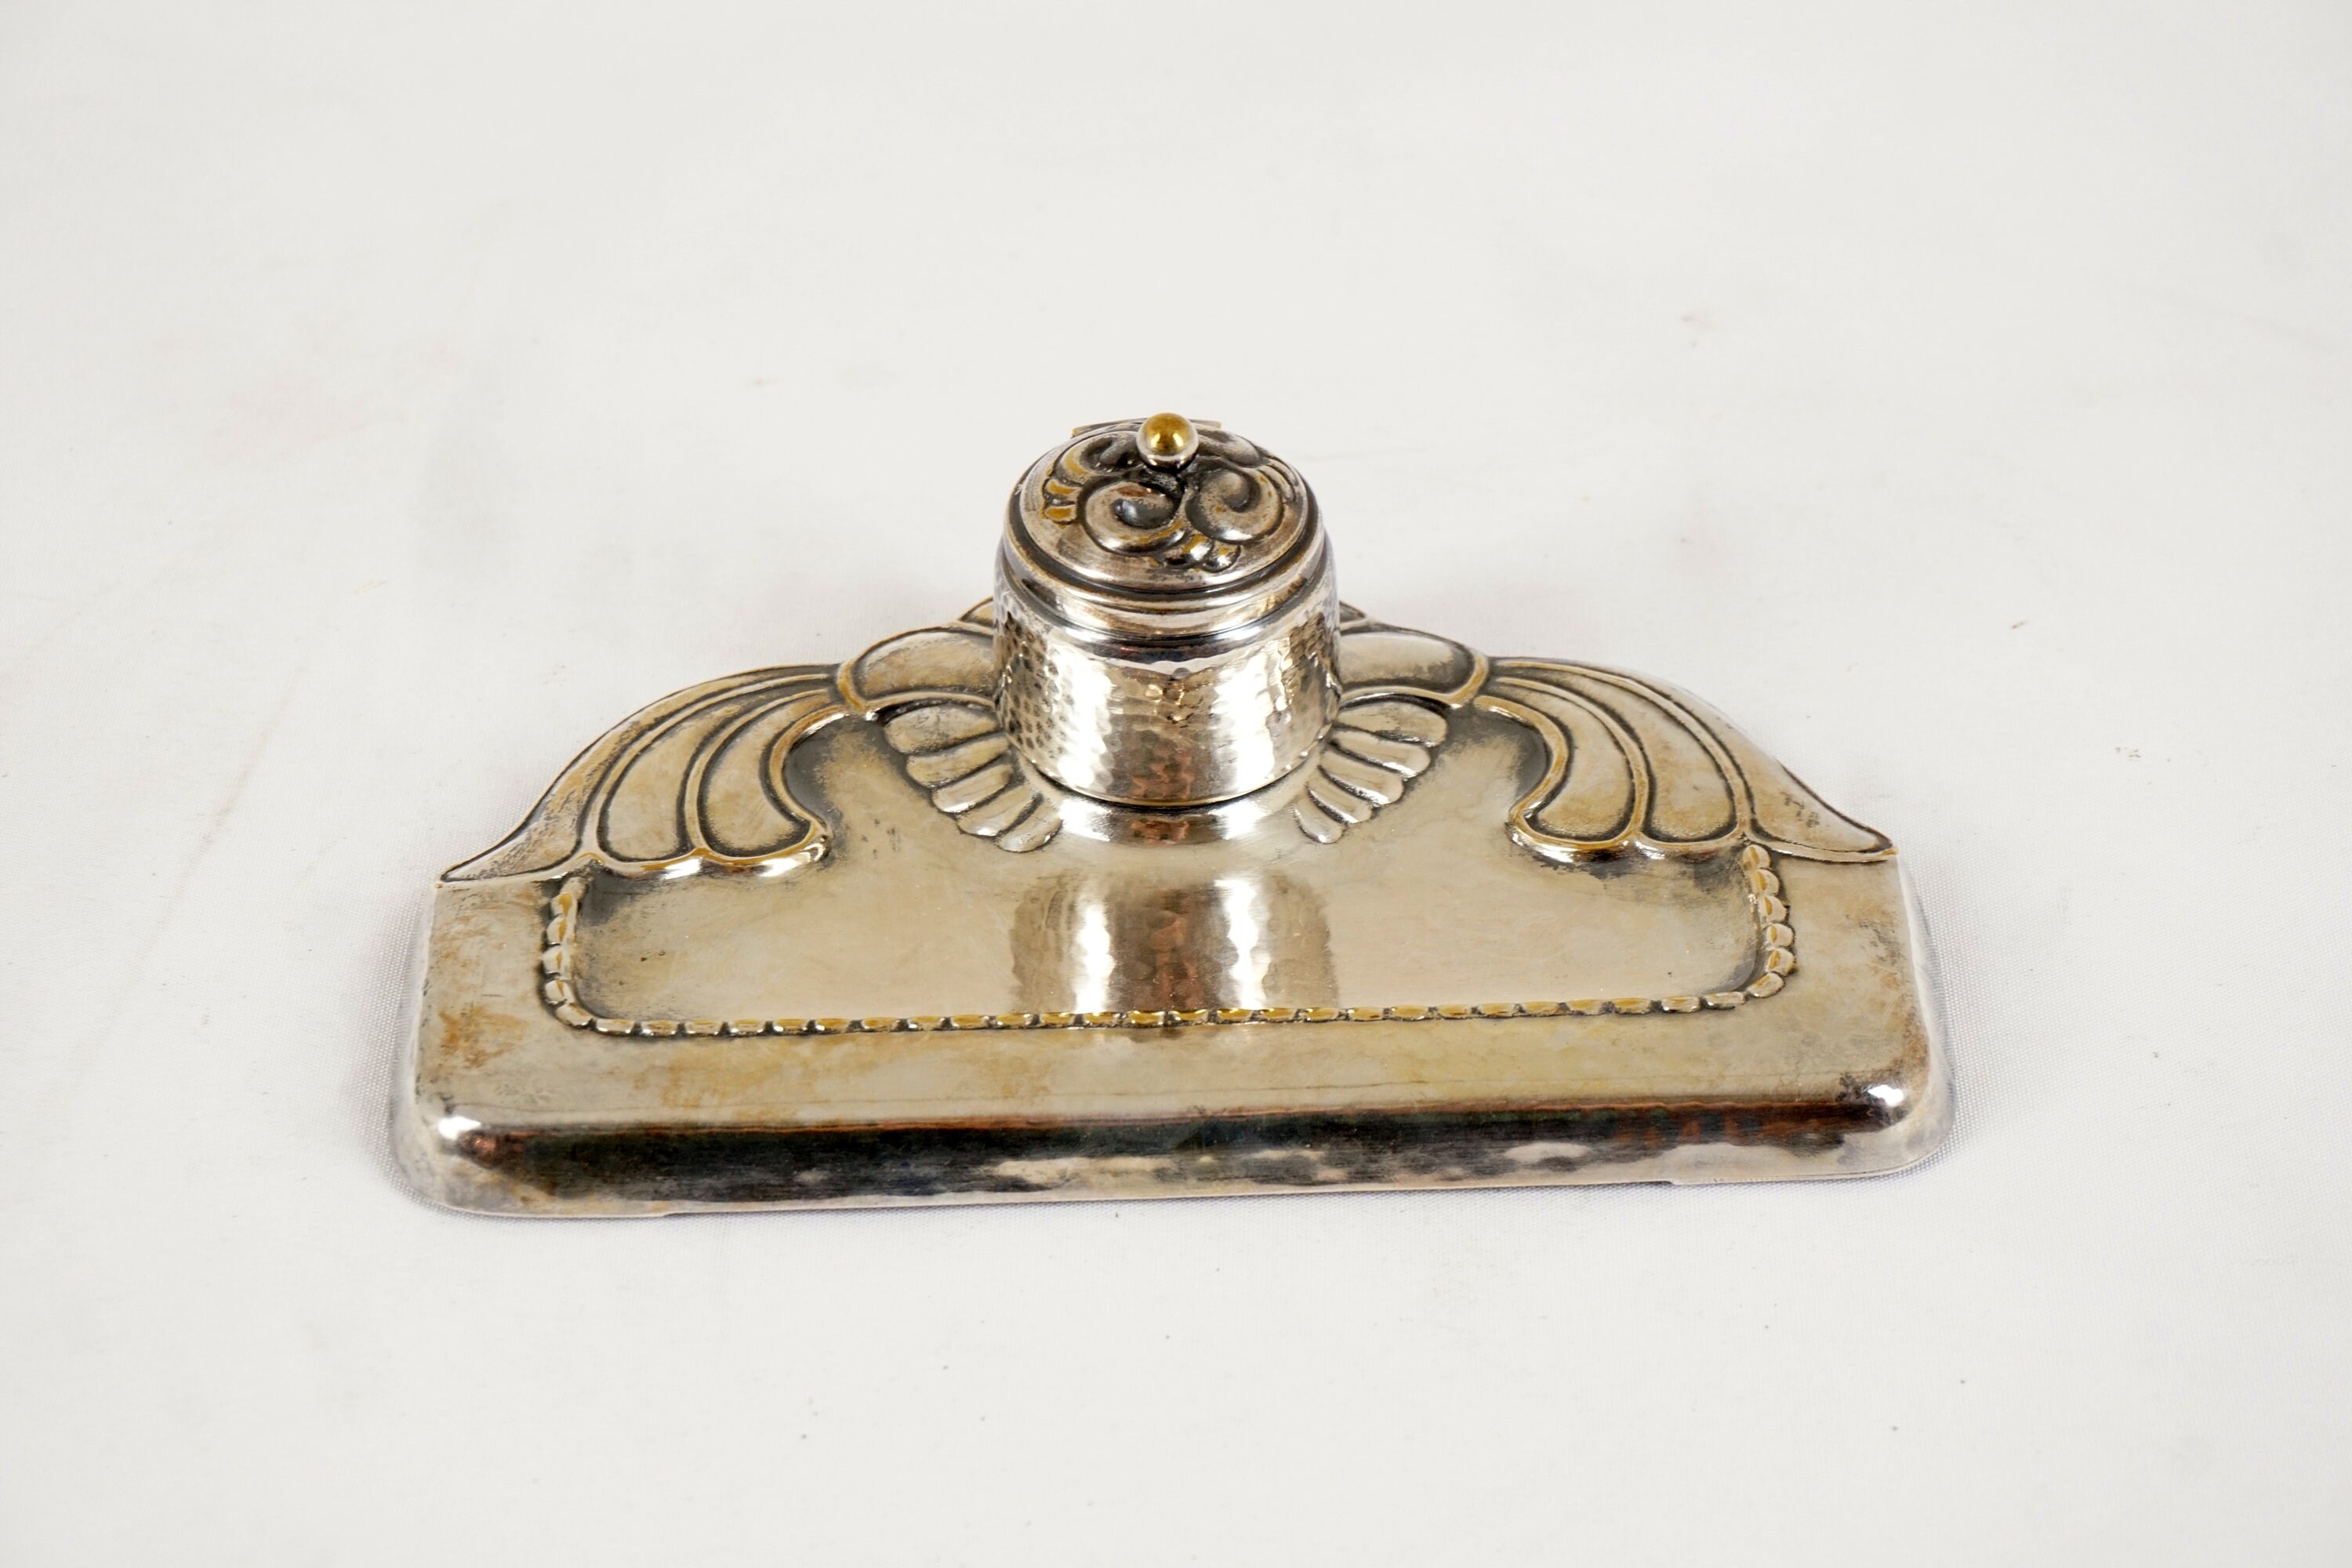 Extra Wide Base Pewter-Plated Inkwell with Quill and Ink Powder- Antique  Vintage Style - Schooner Bay Company